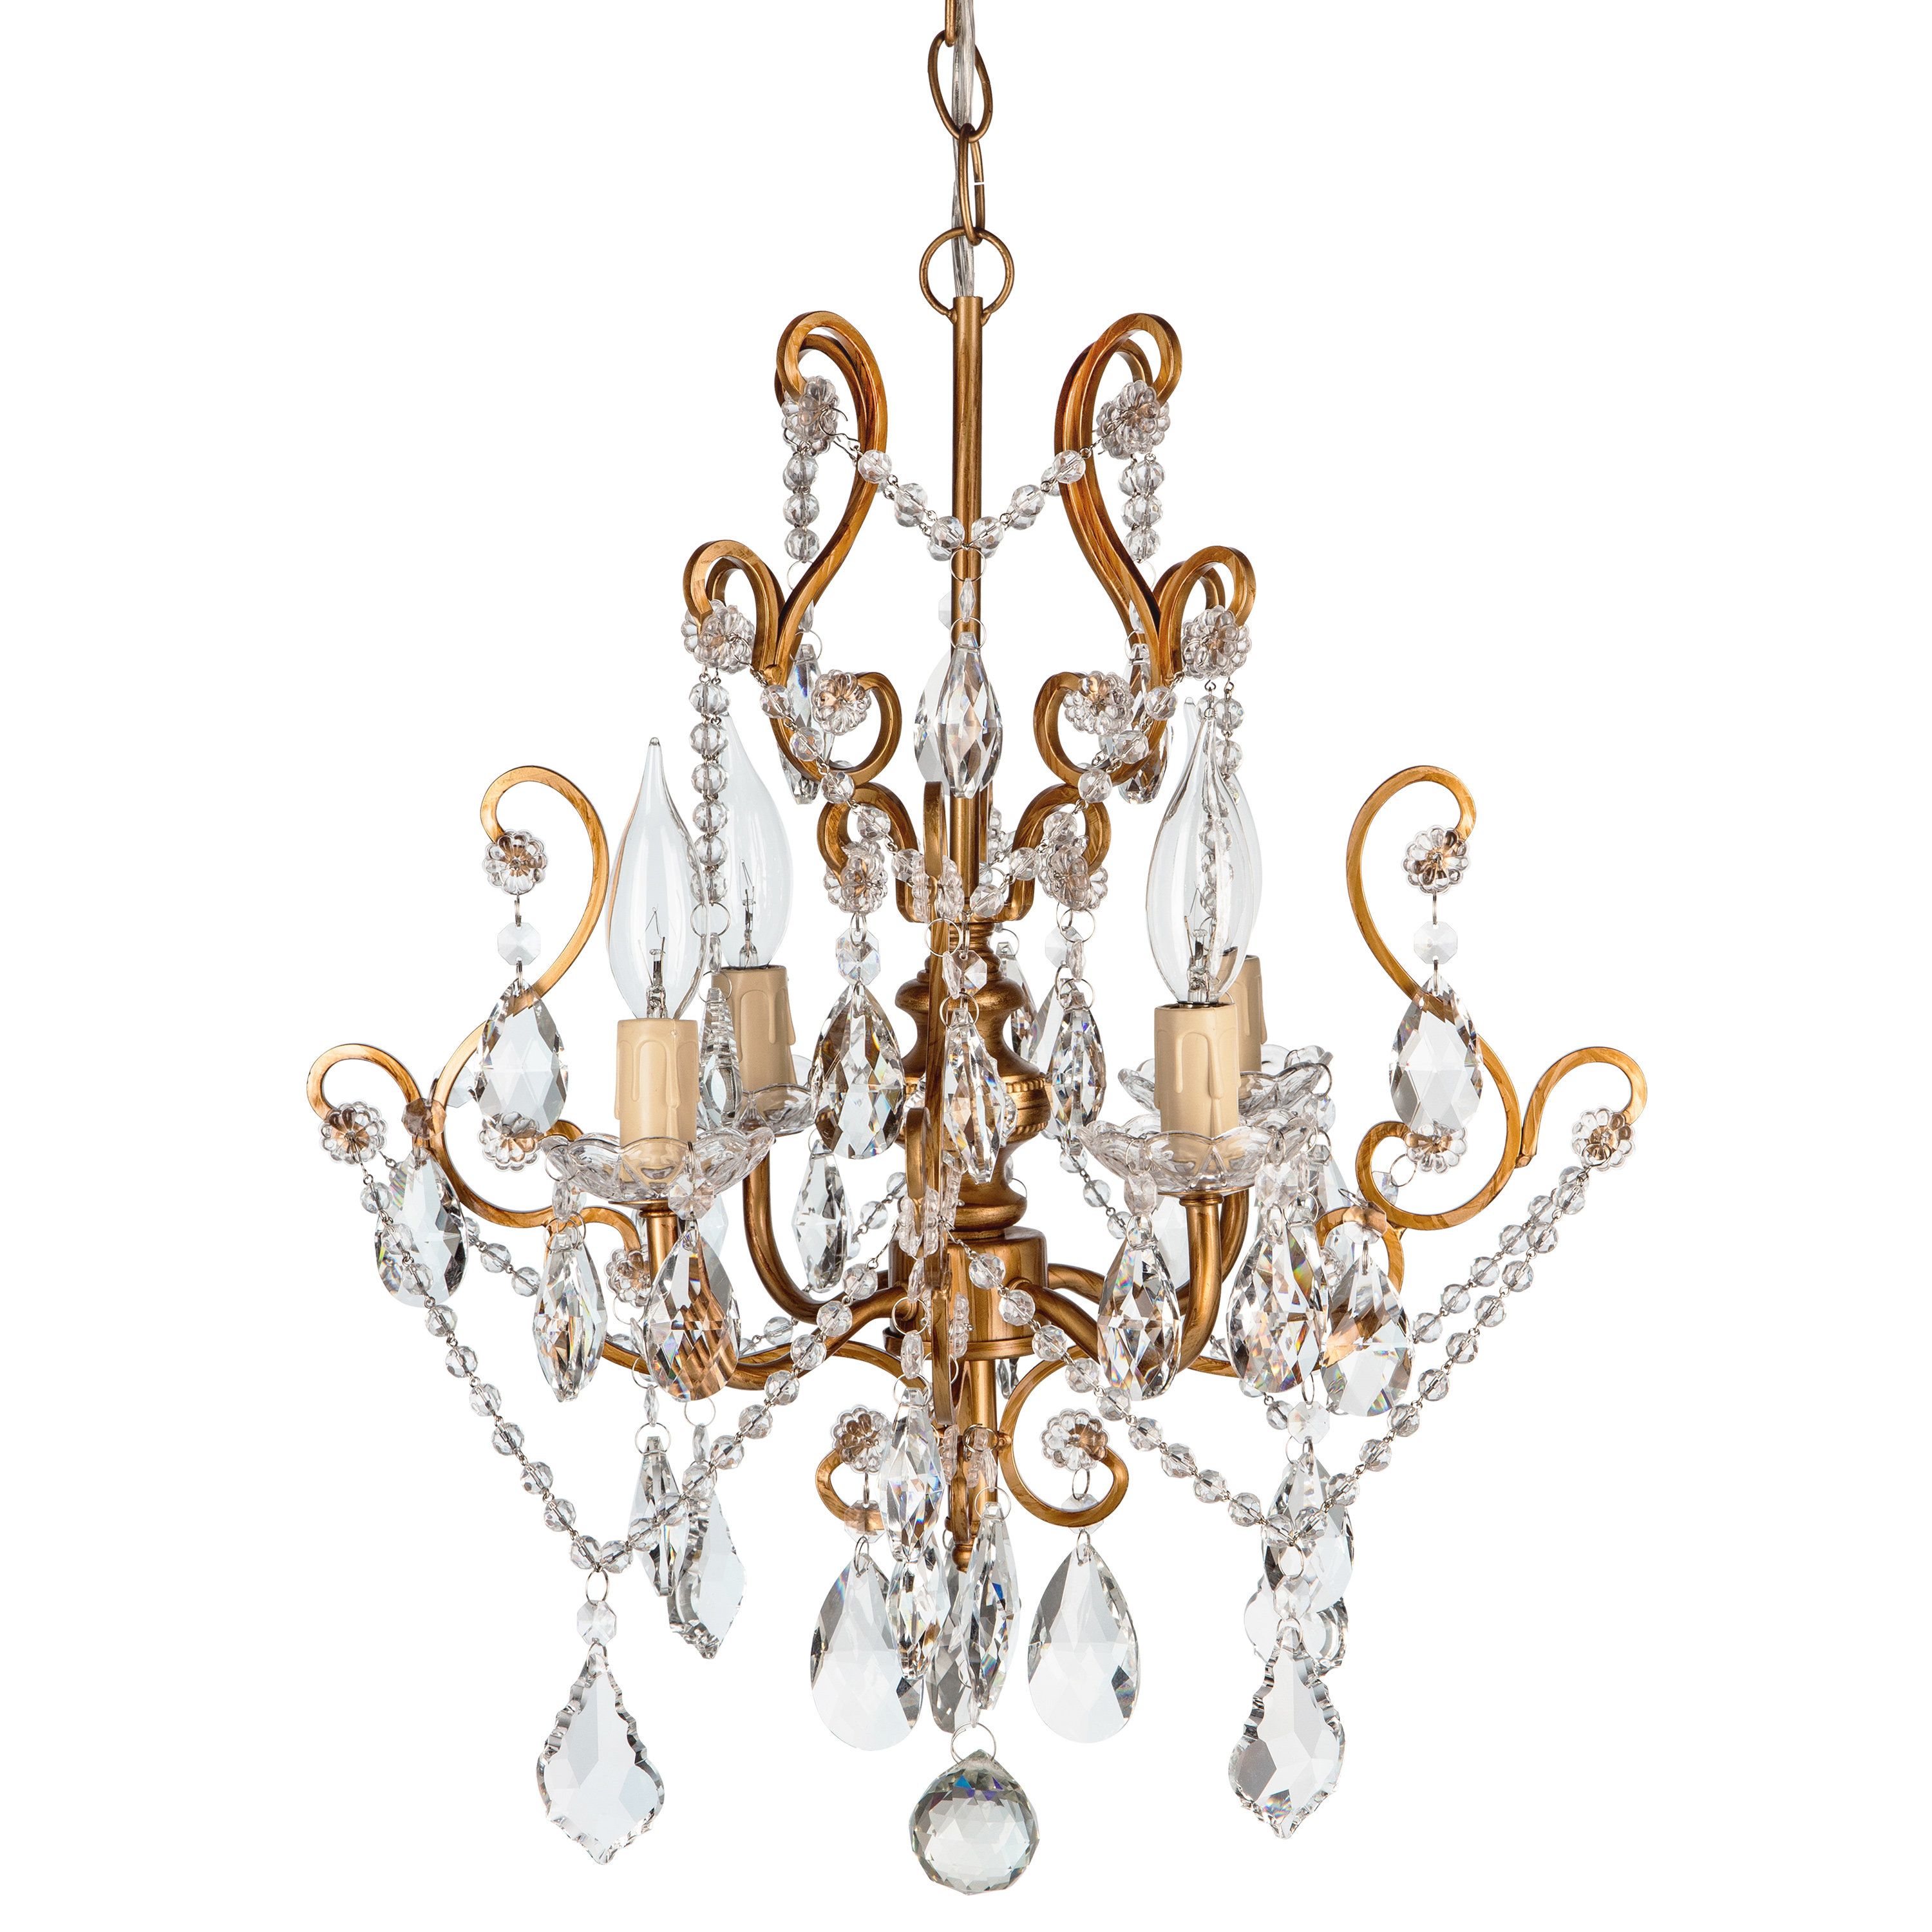 Flemington 4 Light Candle Style Chandelier Intended For Trendy Blanchette 5 Light Candle Style Chandeliers (View 15 of 25)